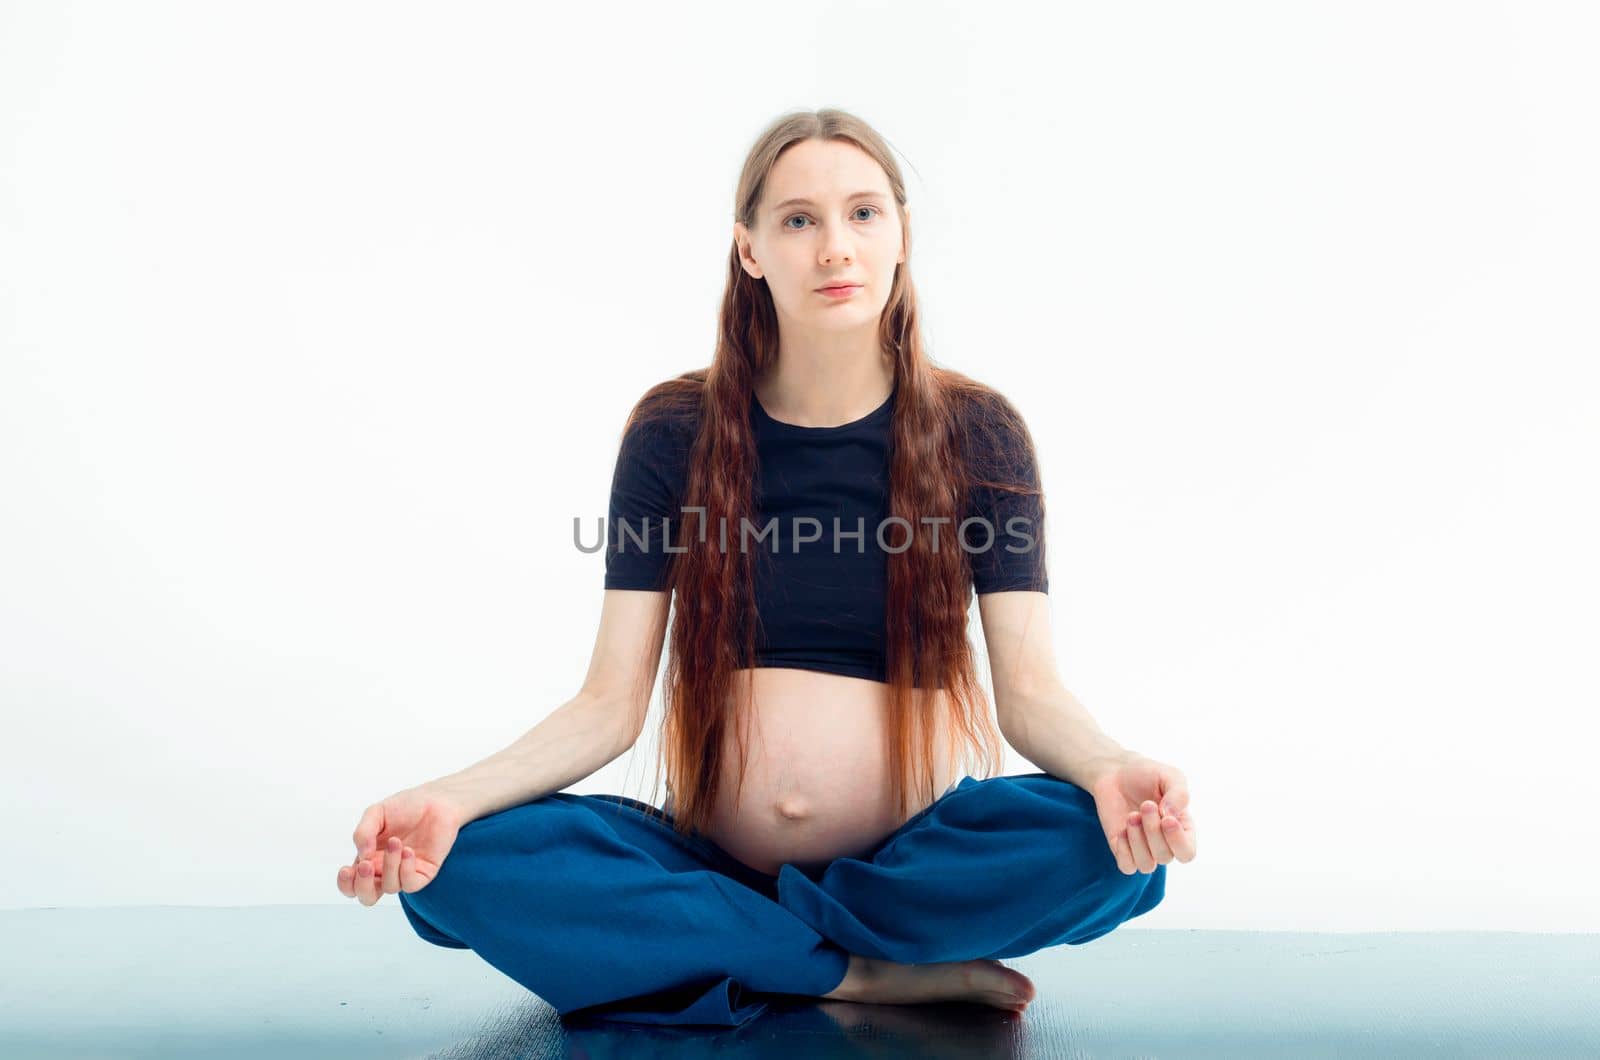 Pleasant pregnant woman posing in profile and trying yoga Young happy expectant relaxing, thinking about her baby and enjoying her future life. Motherhood, pregnancy, yoga concept, lotus position.